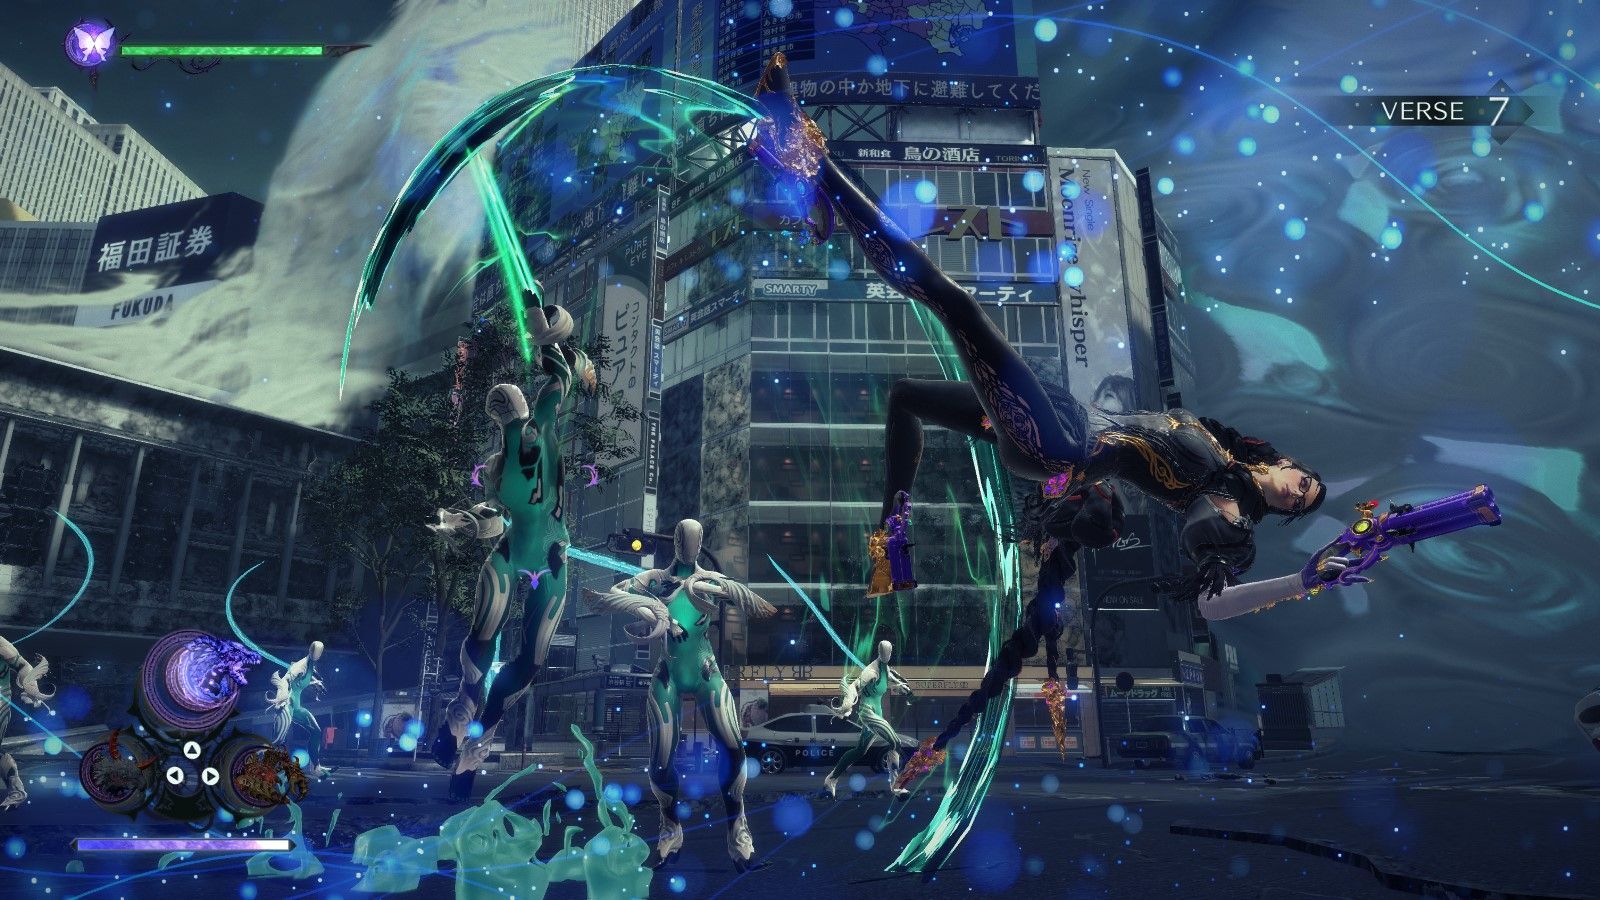 Bayonetta 3 Release Date and New Features (Switch Exclusive)